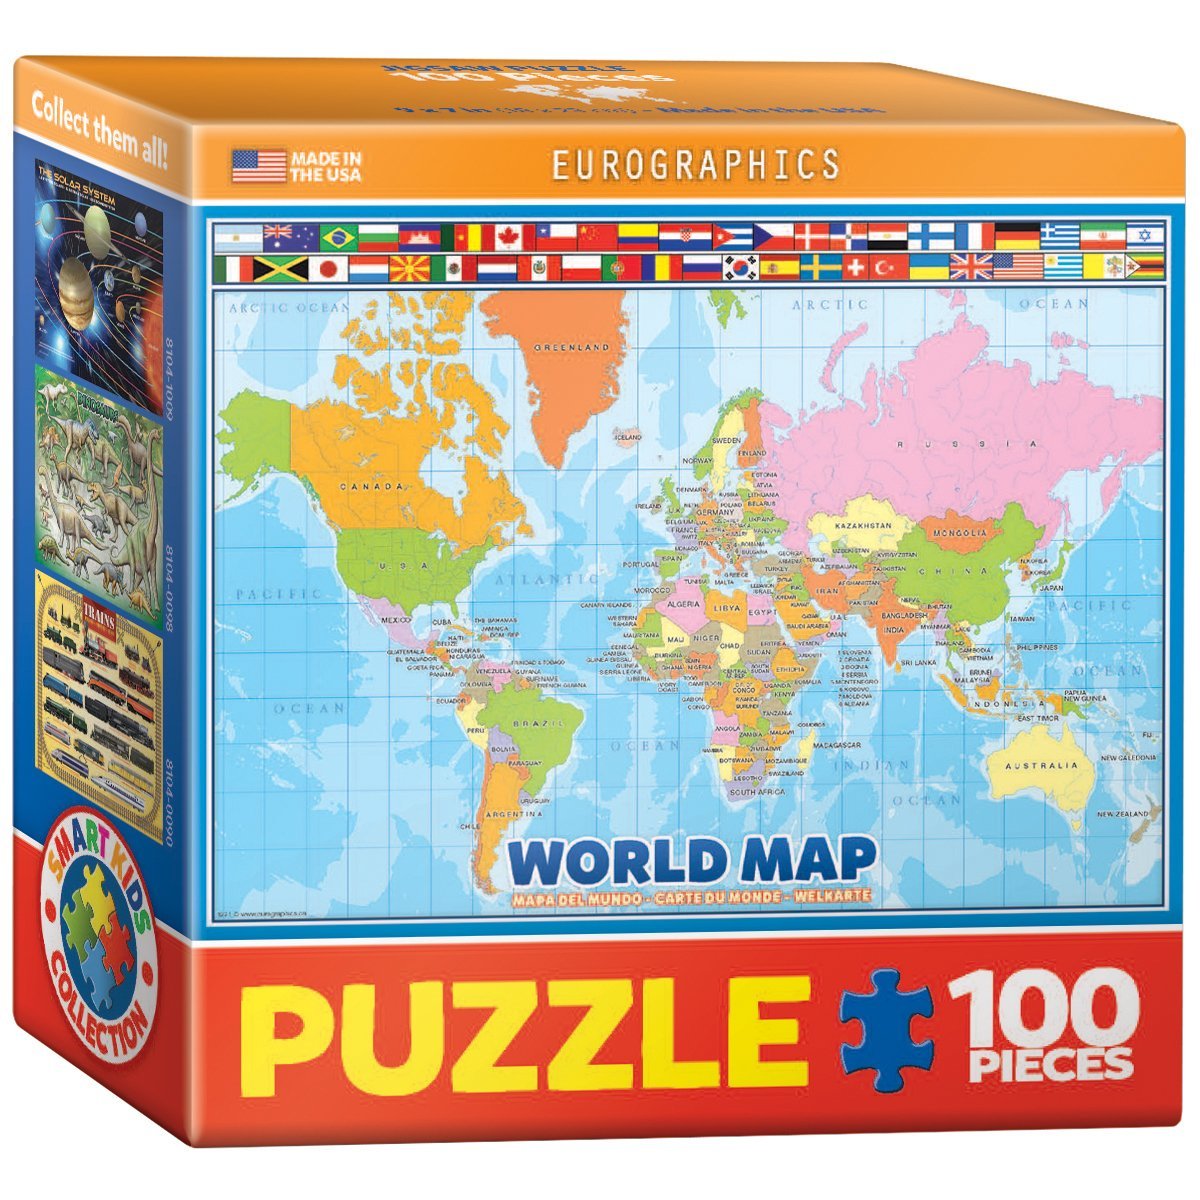 World Map for Kids, 100 pieces - Eurographics